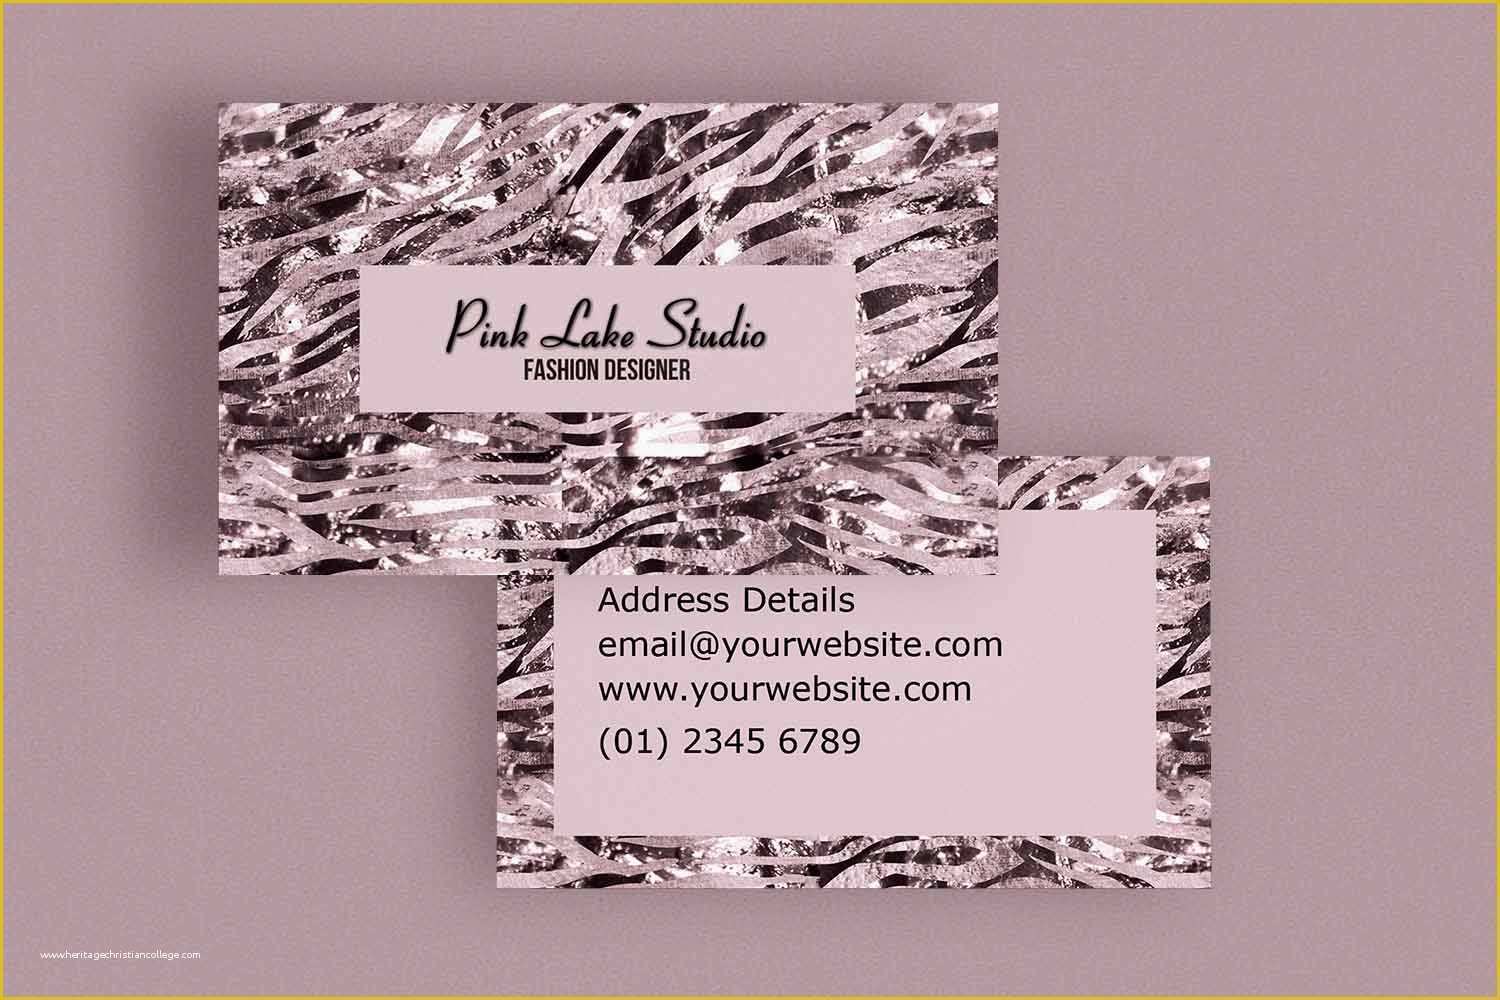 Pink Zebra Business Card Template Free Of Glitzy Pink Zebra Print Business Card Template